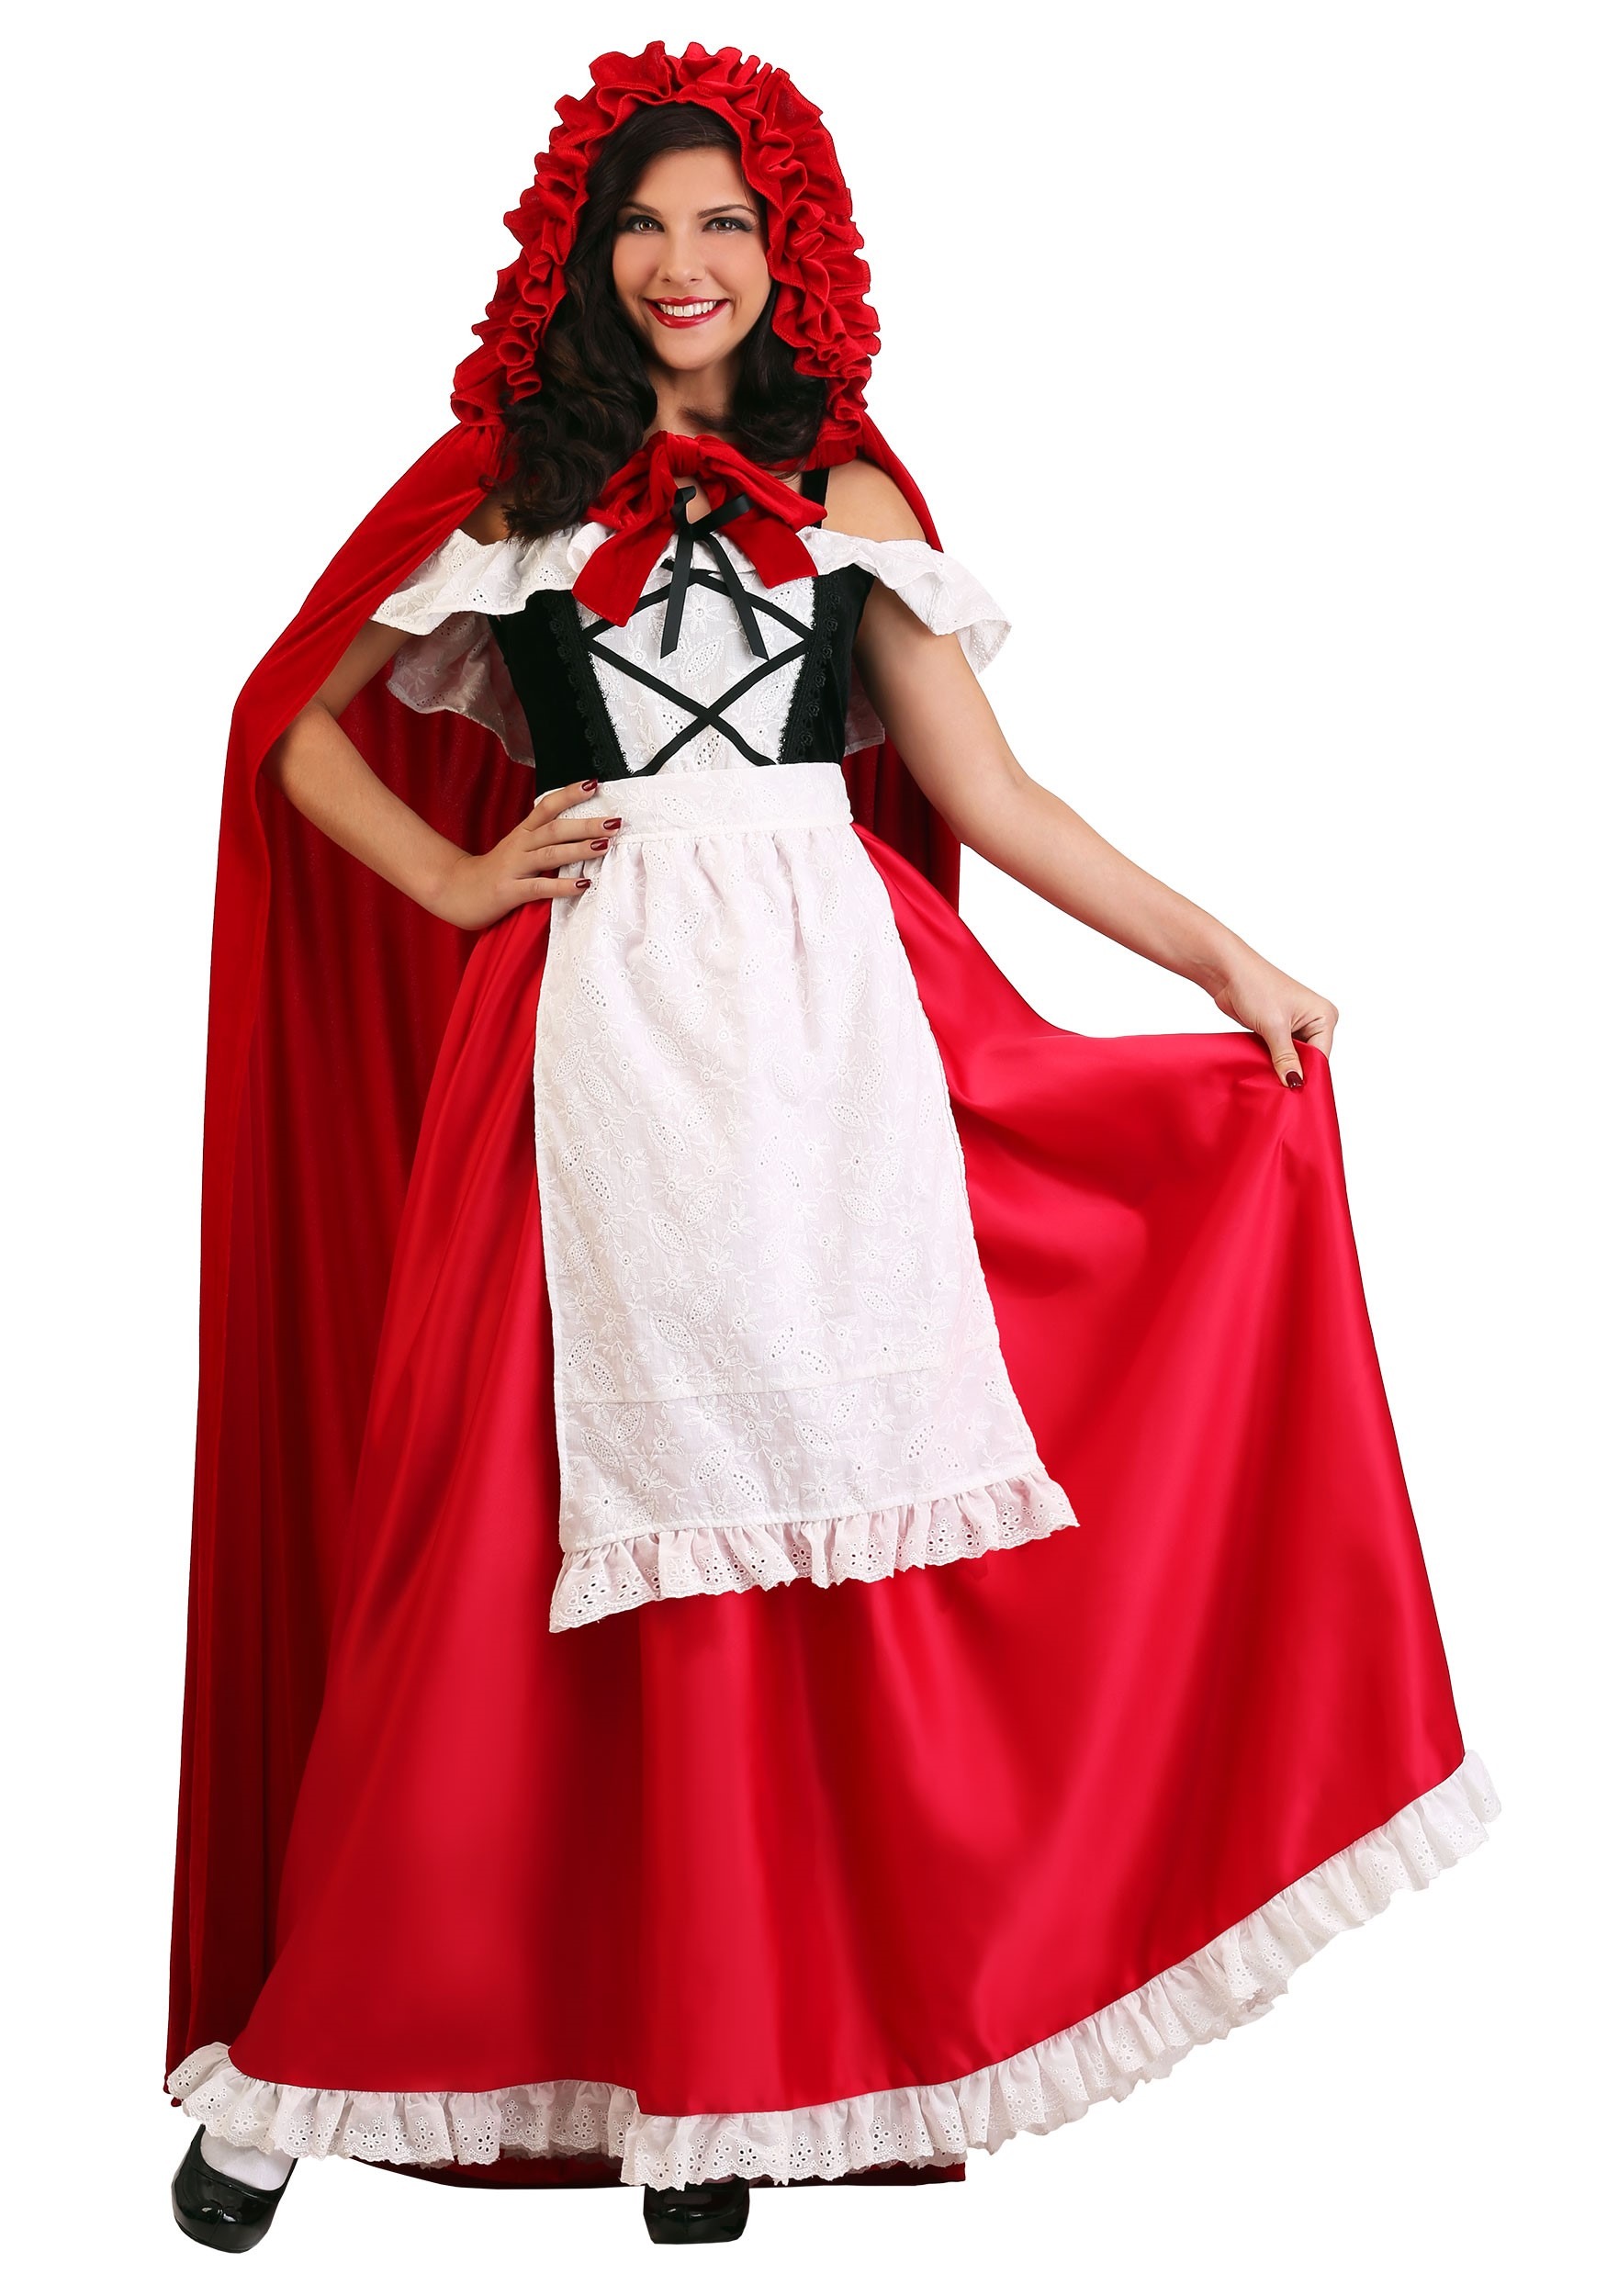 Image of Deluxe Red Riding Hood Women's Costume ID FUN6697AD-S